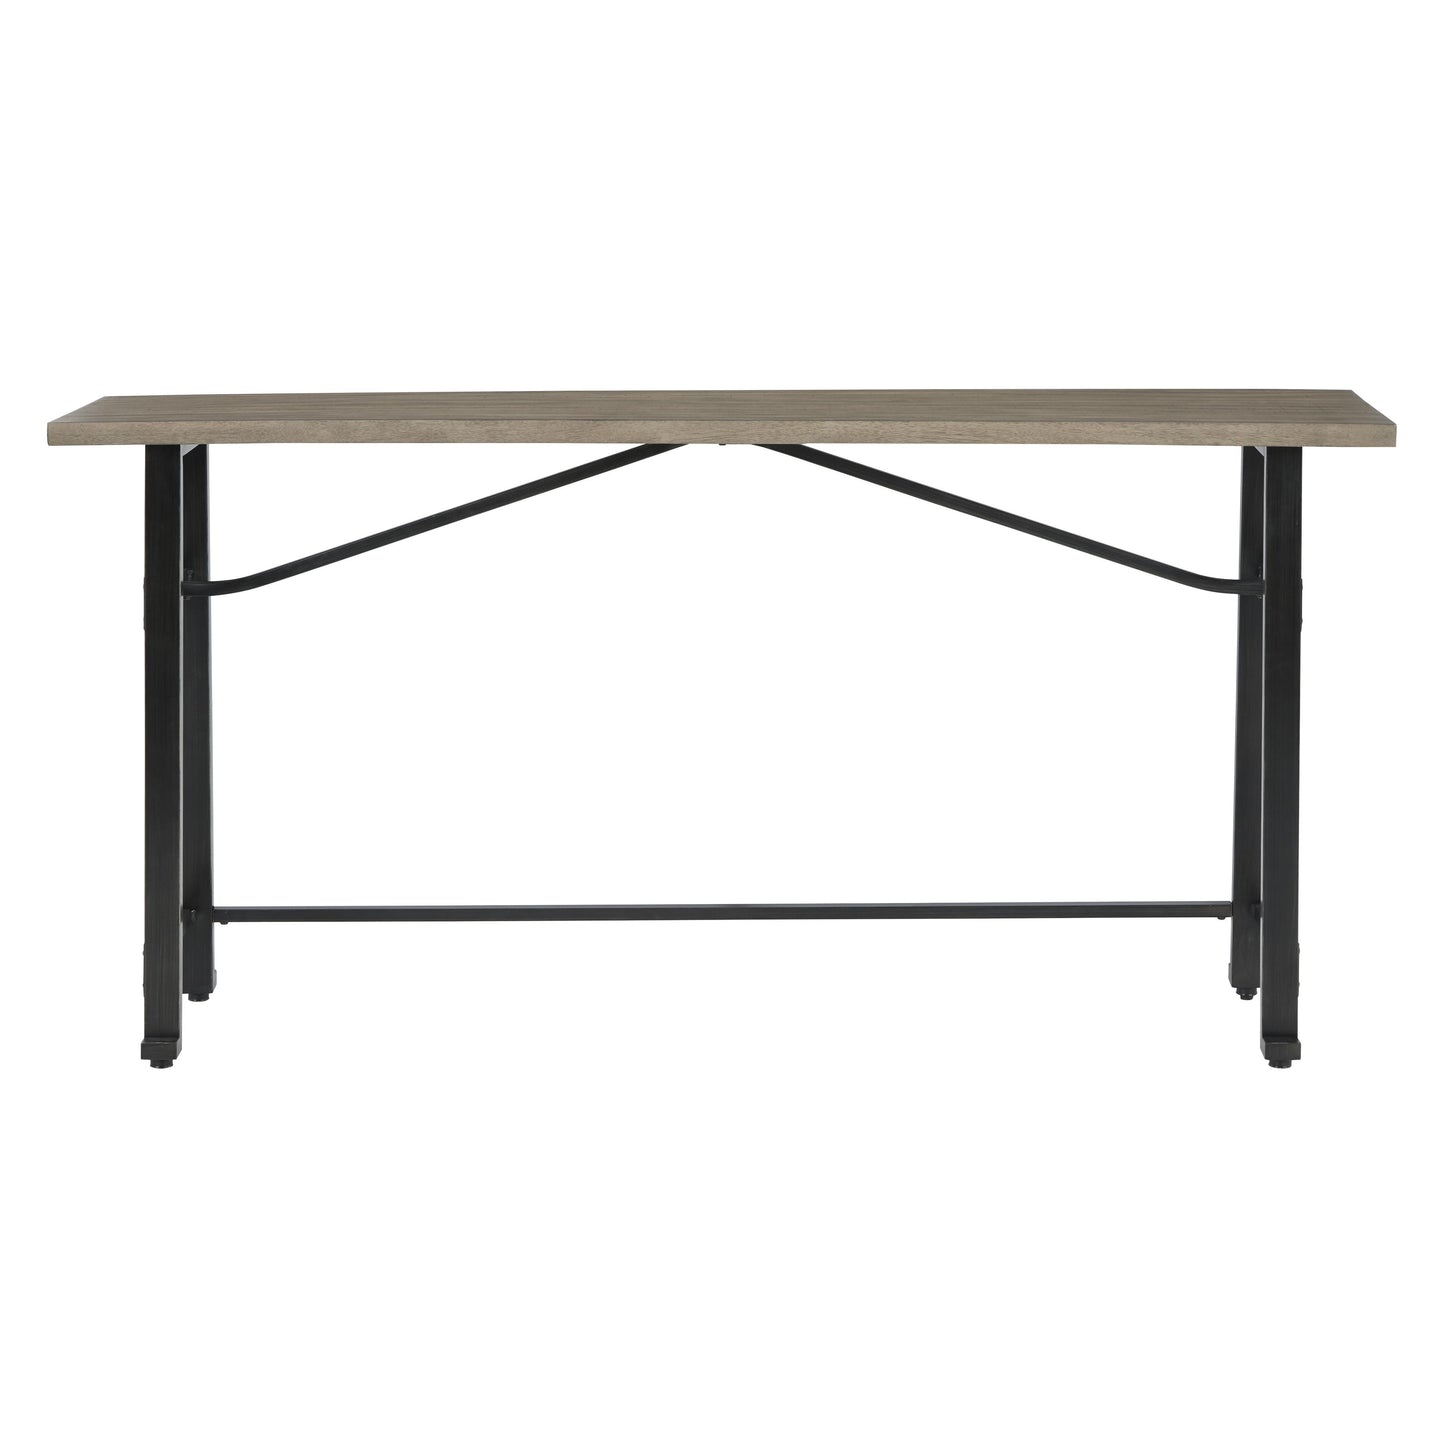 Signature Design by Ashley Lesterton Counter Height Dining Table with Trestle Base D334-52 IMAGE 2